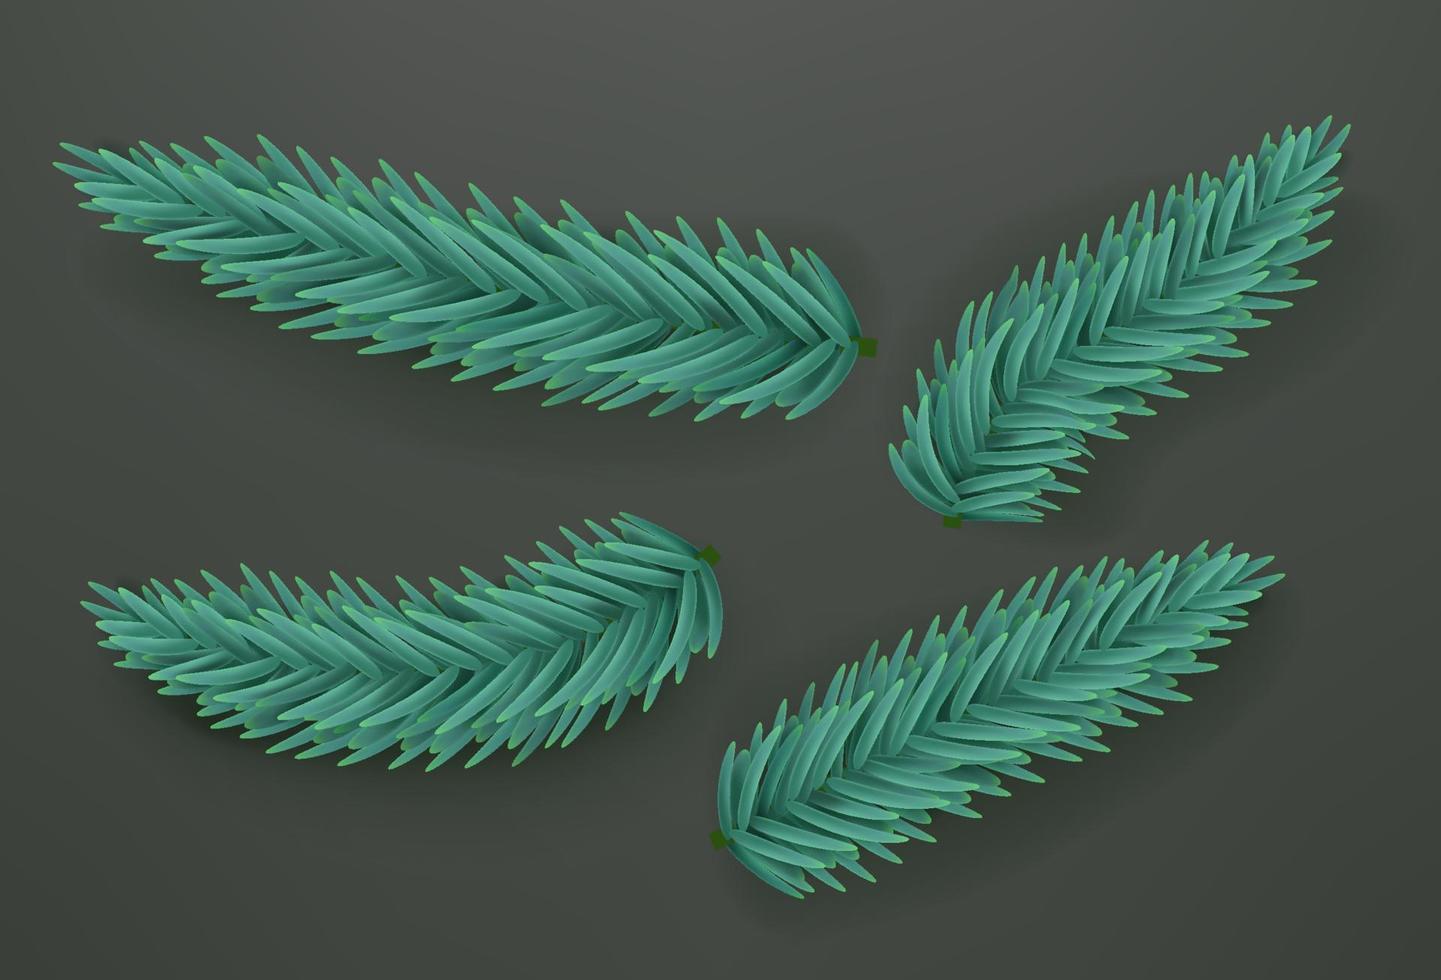 Blue pine branches vector clipart